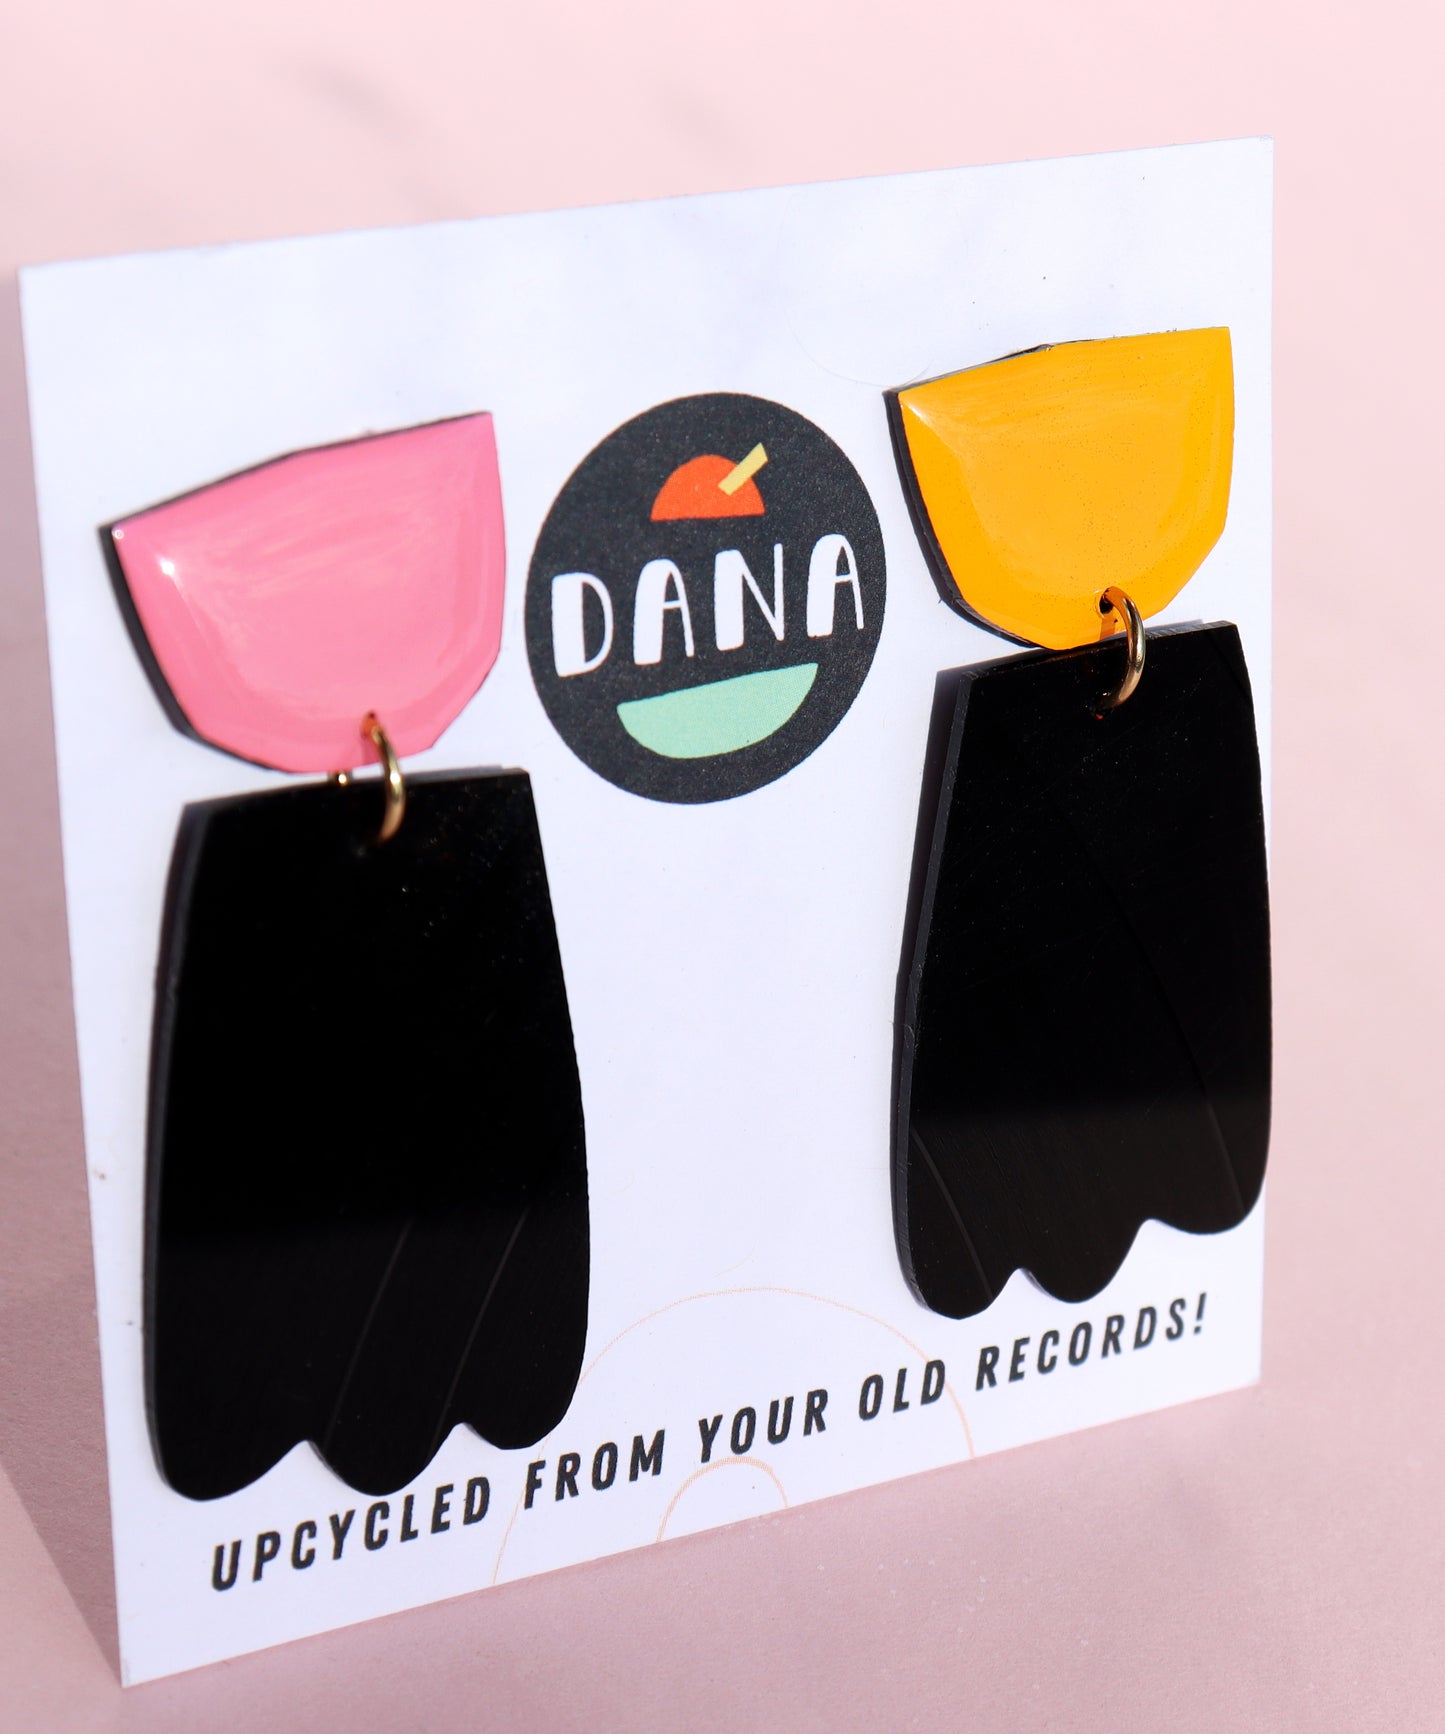 Quirky upcycled art earrings made from reclaimed vinyl records